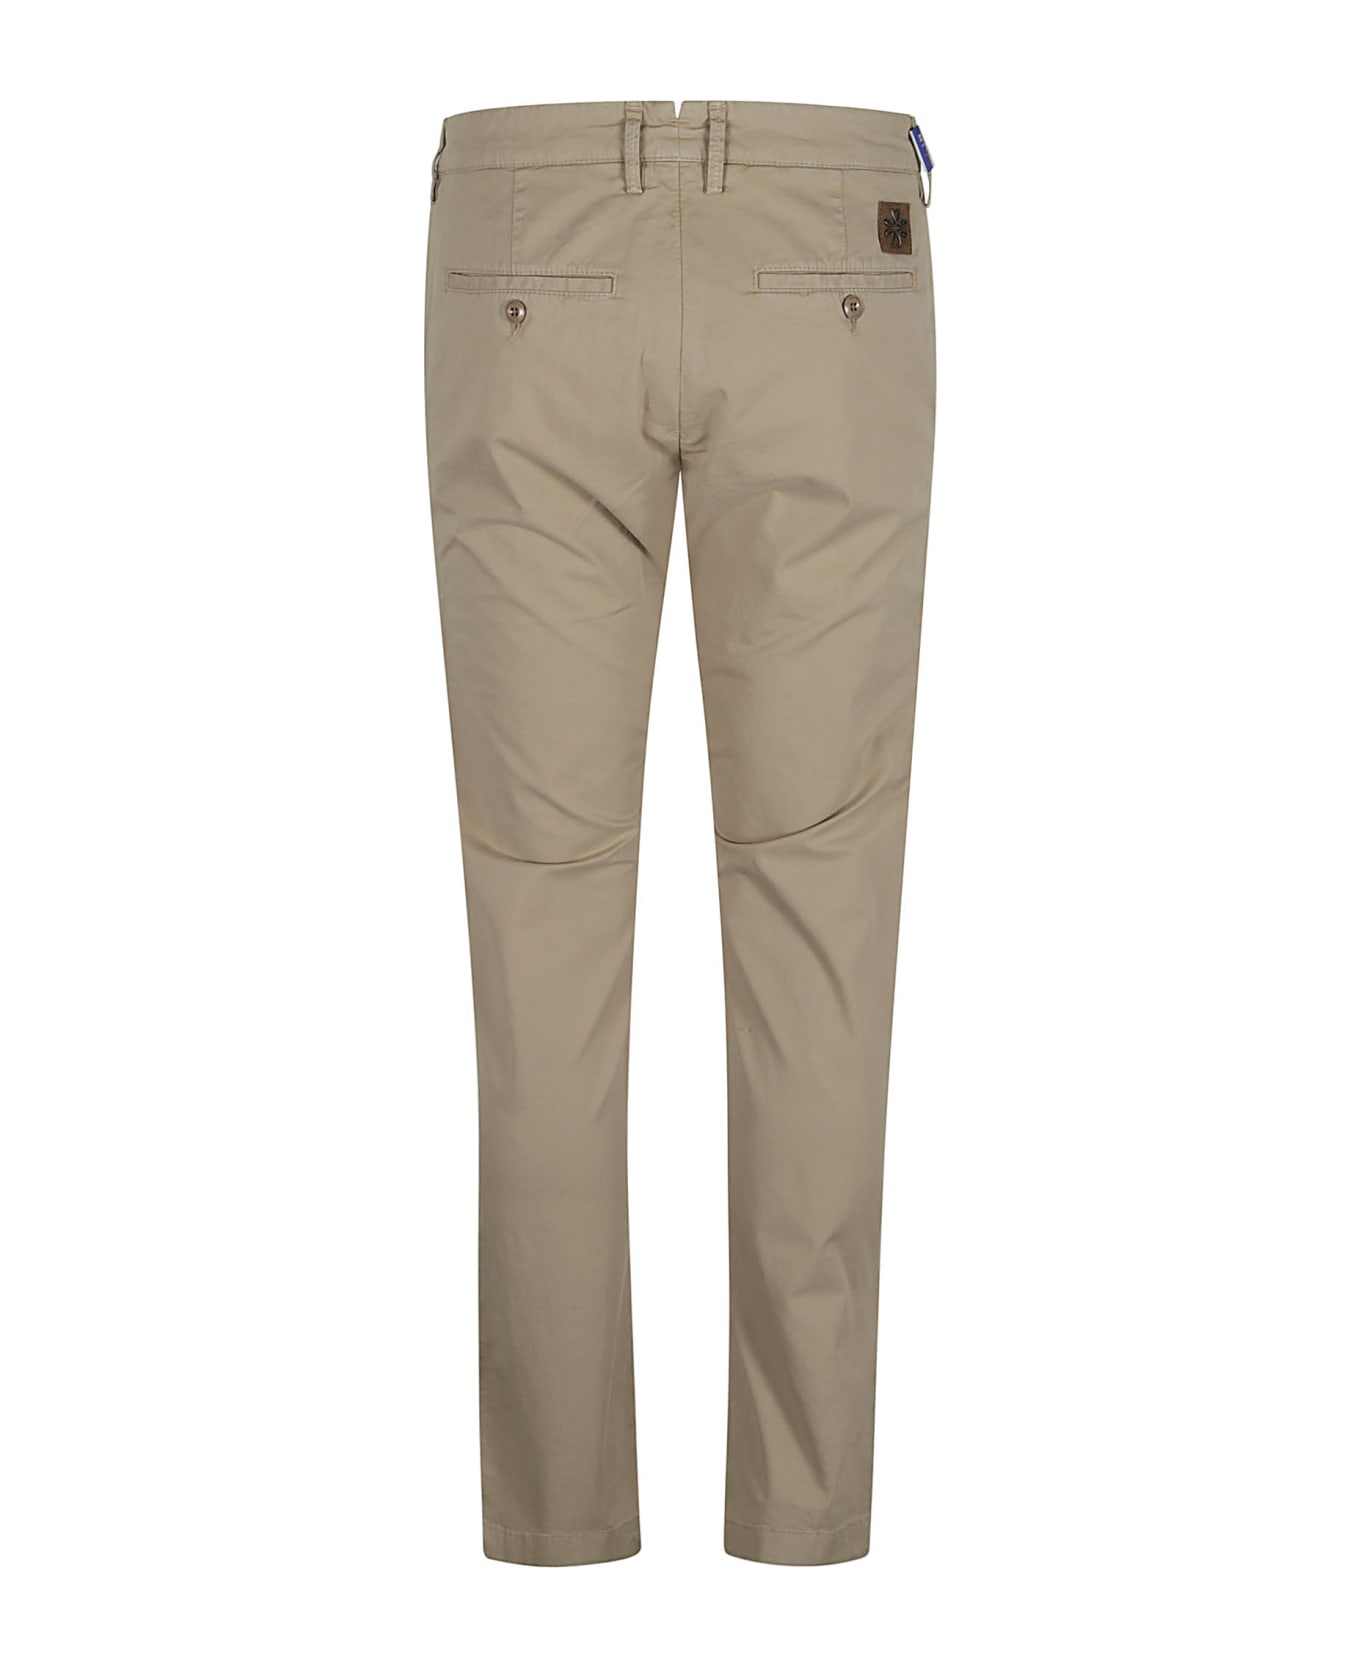 Jacob Cohen Button Fitted Ladies Trousers - Emp Beige